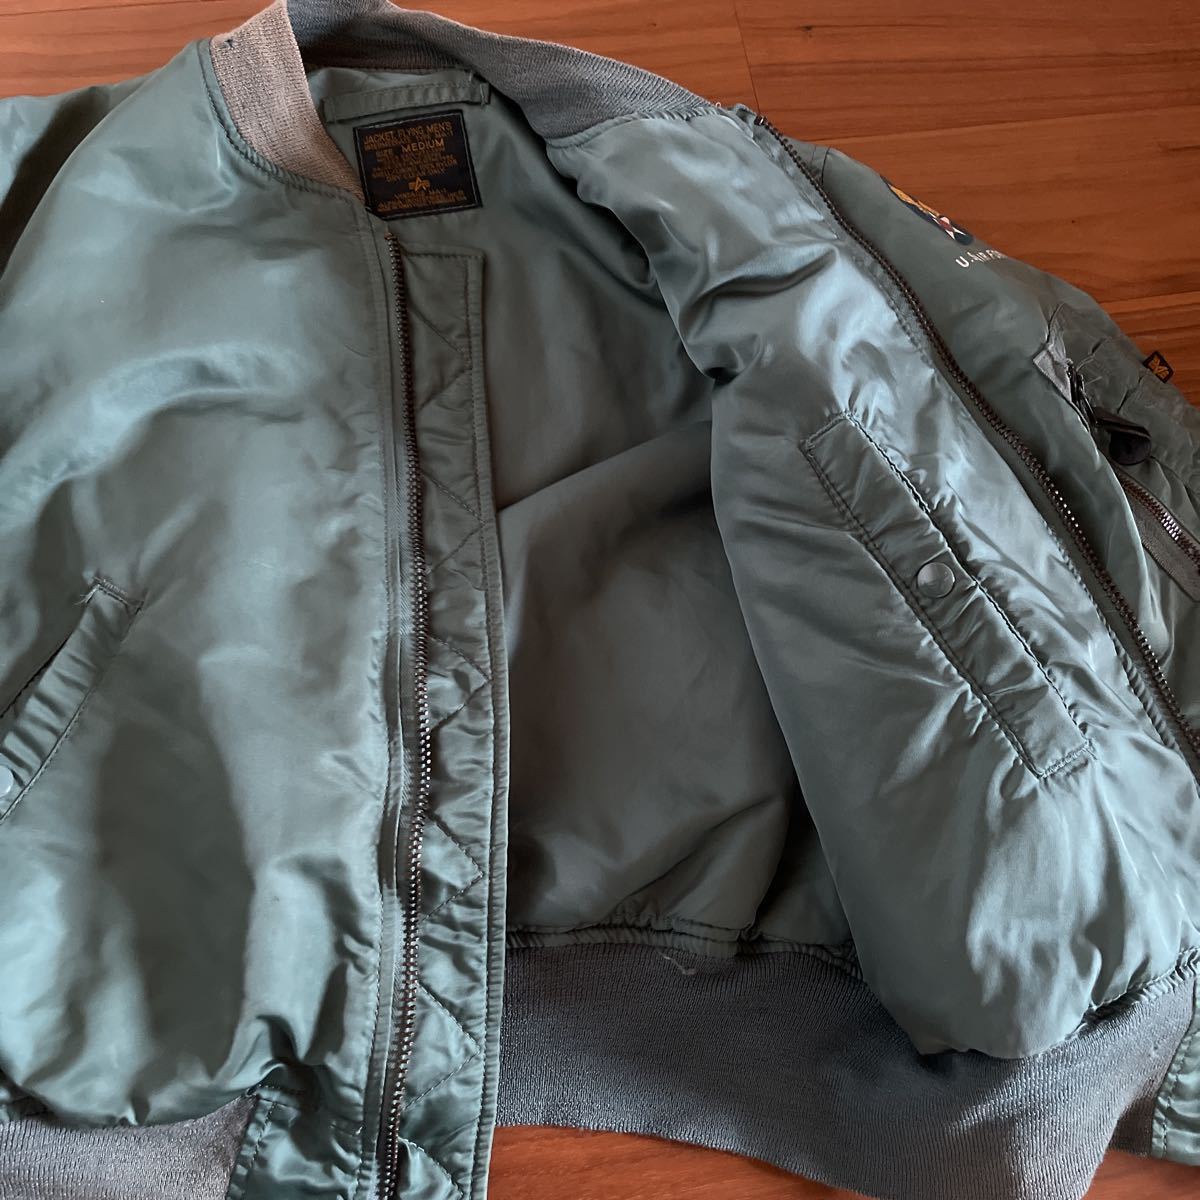 50's復刻モデル ALPHA社 90's 初期 MA-1 セージグリーン made in usa アメリカ製 フライトジャケット アルファ  ALPHA INDUSTRIES